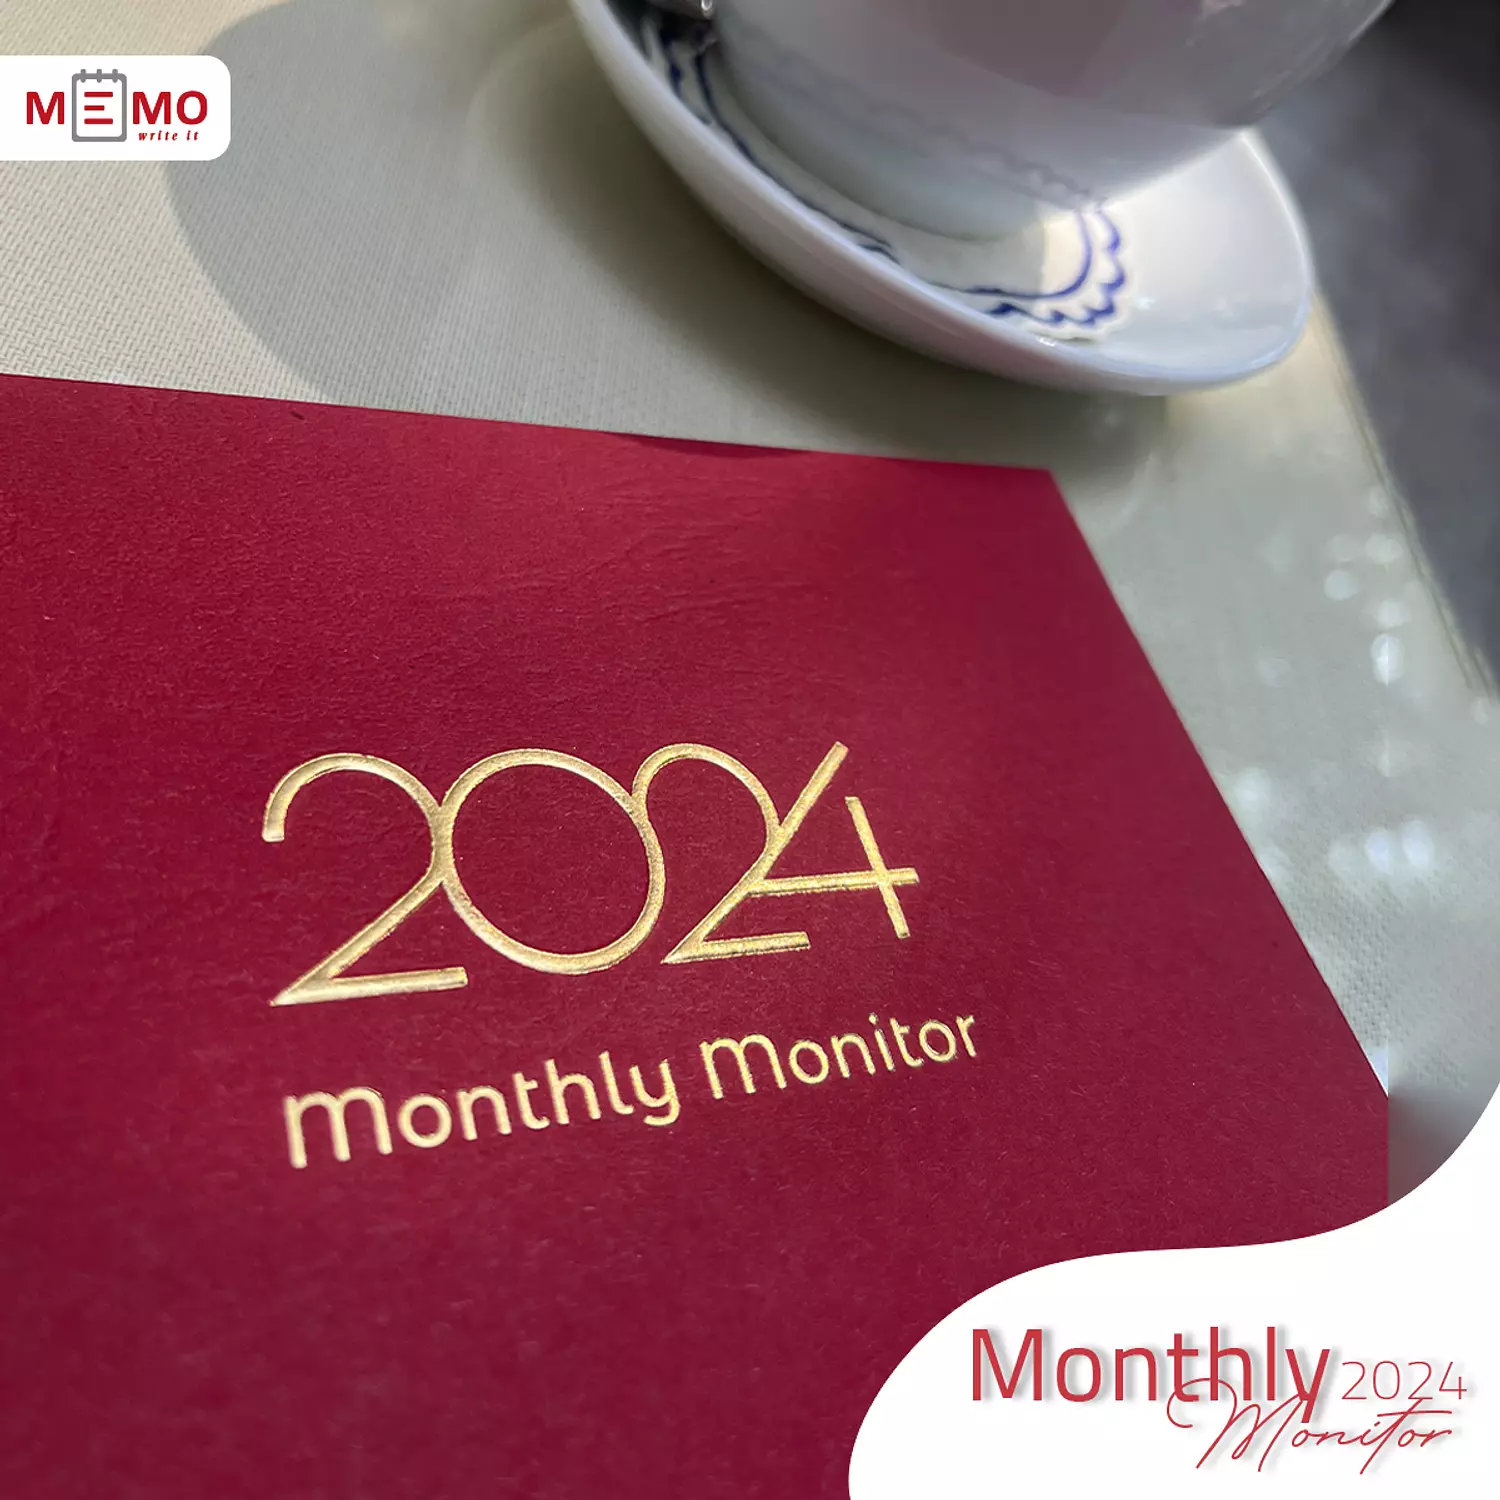 Memo Monthly Monitor 2024 4